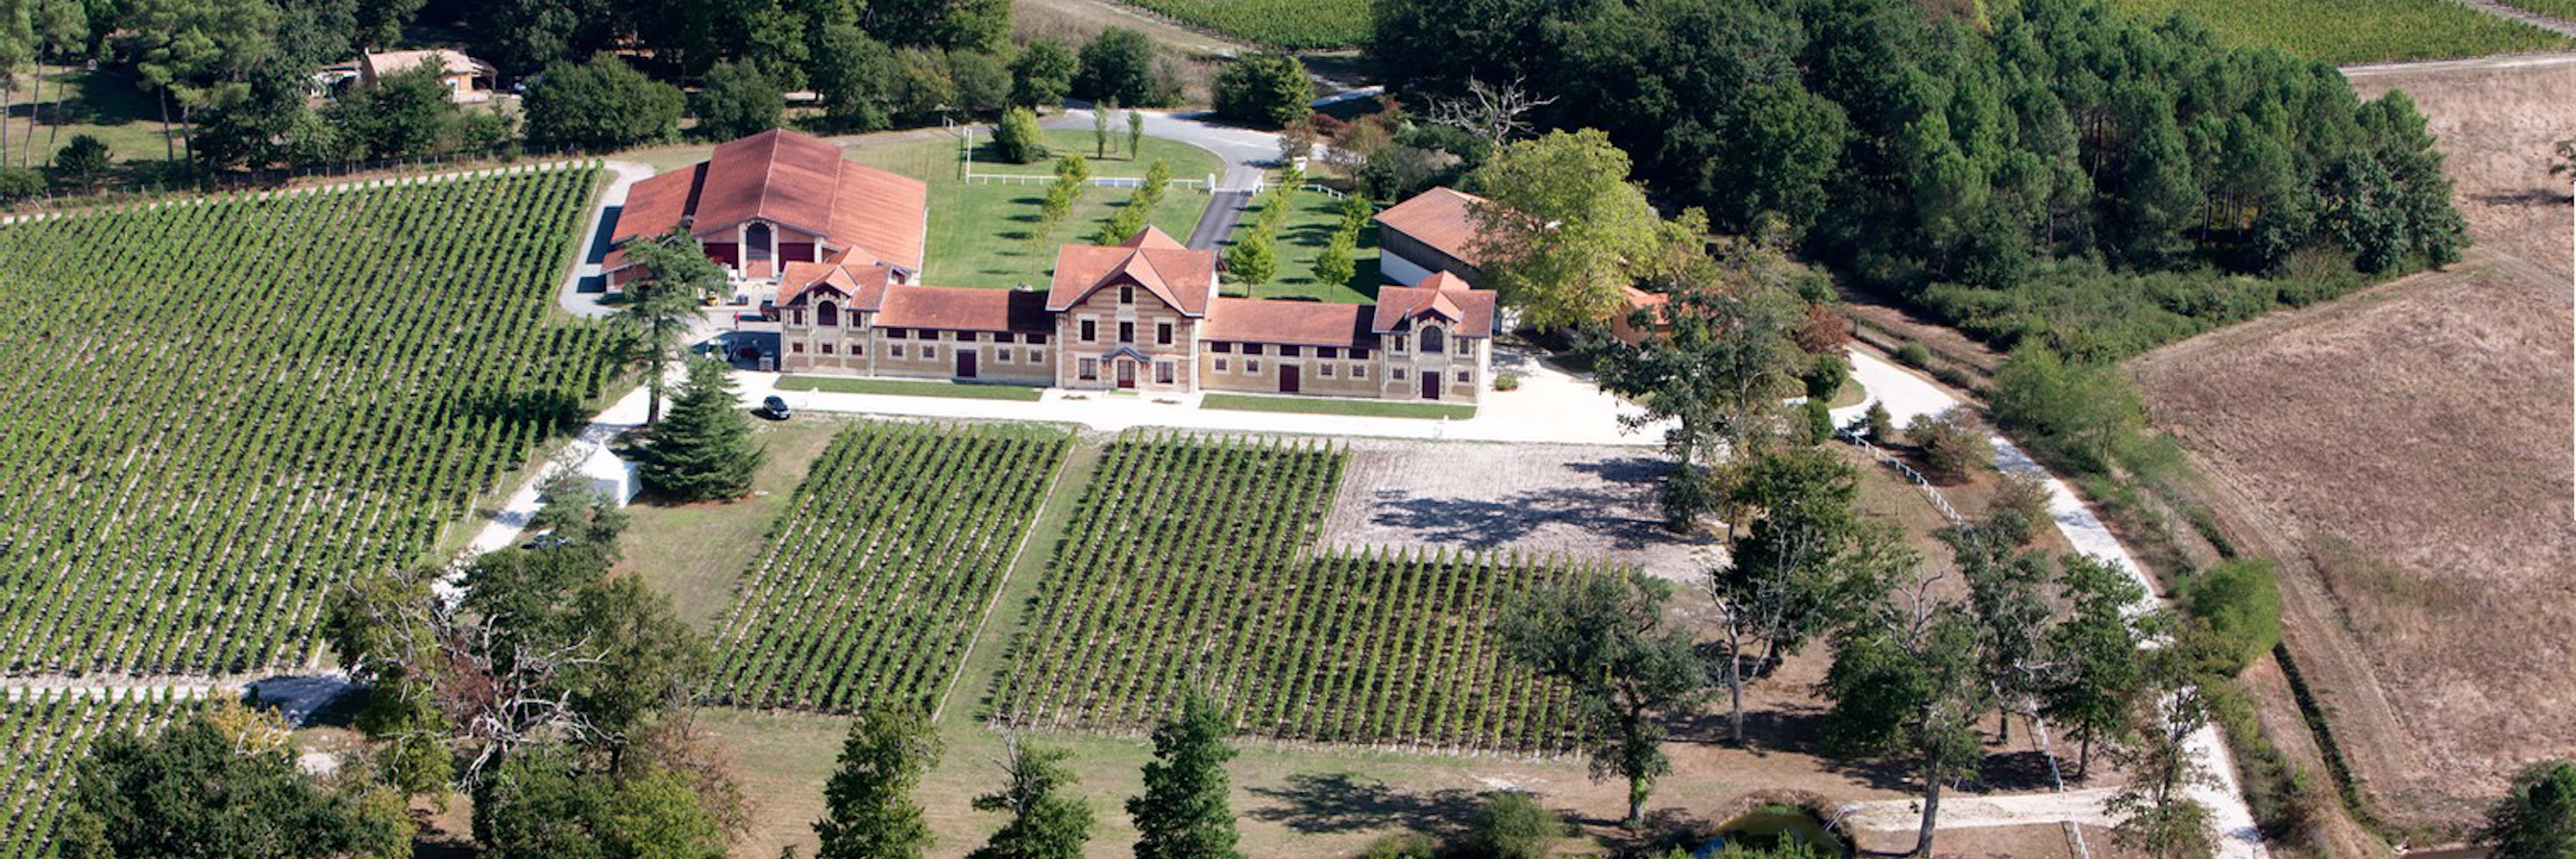 An aerial photo of vineyard startup accelerator Chateau Le Sartre bordeaux france